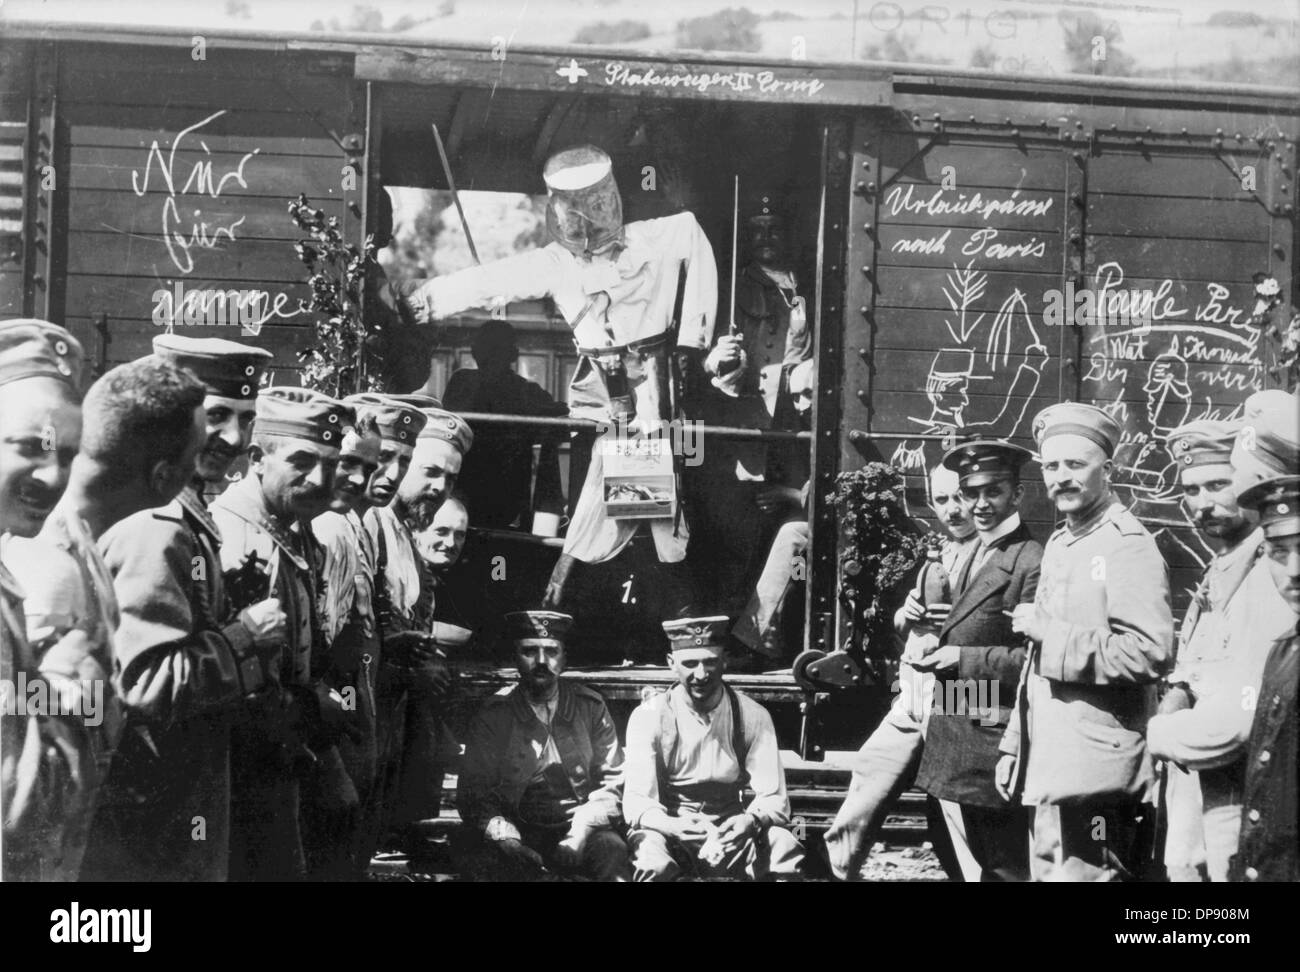 German soldiers enjoy themselves with a handcraftet puppet and writings like 'Holiday greeting to Paris' in front of a train shortly before the transportation of troops during World War I in 1914. Emperor Wilhelm II. announced the general mobilistaion on the 1st of August in 1914. Set off by the deadly shots on Austrian heir to the throne Franz Ferdinand by Serbian nationalists on the 28th of June in 1914 in Sarajevo, World War I broke out. Stock Photo